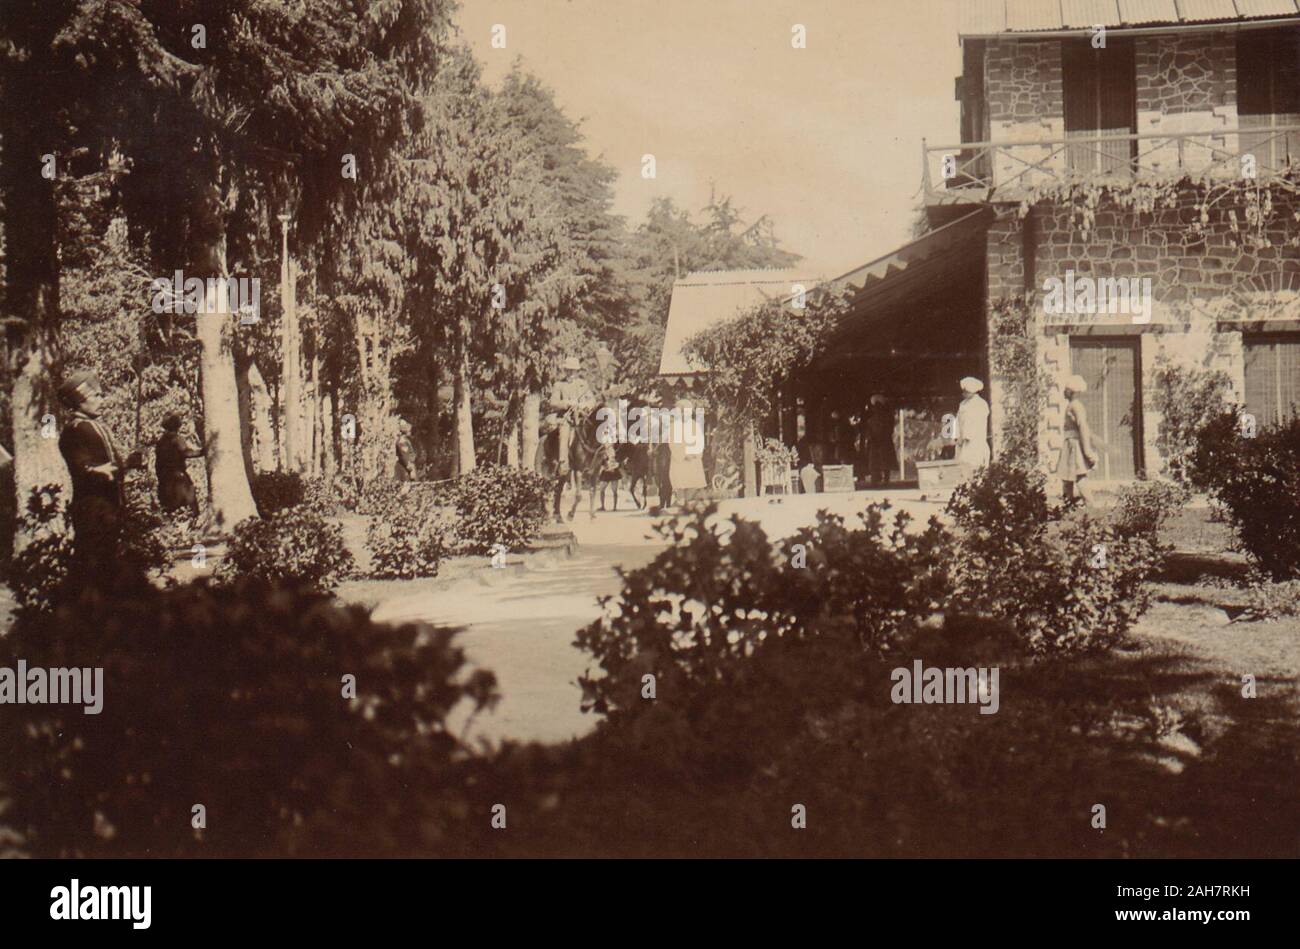 India, Exterior view of the gardens and buildings of Jandri Ghat, Dalhousie, built in 1870-71 as a residence of the Kings of Chamba. There are European guests on horseback and Indians standing in the gardens. Winthrop and Maclagan's party stayed here on the night of the 28th April on the way back from Chamba to Lahore.Original manuscript caption: Leaving Jandrighat, 29 April 1920. 2001/243/1/1/3/82. Stock Photo